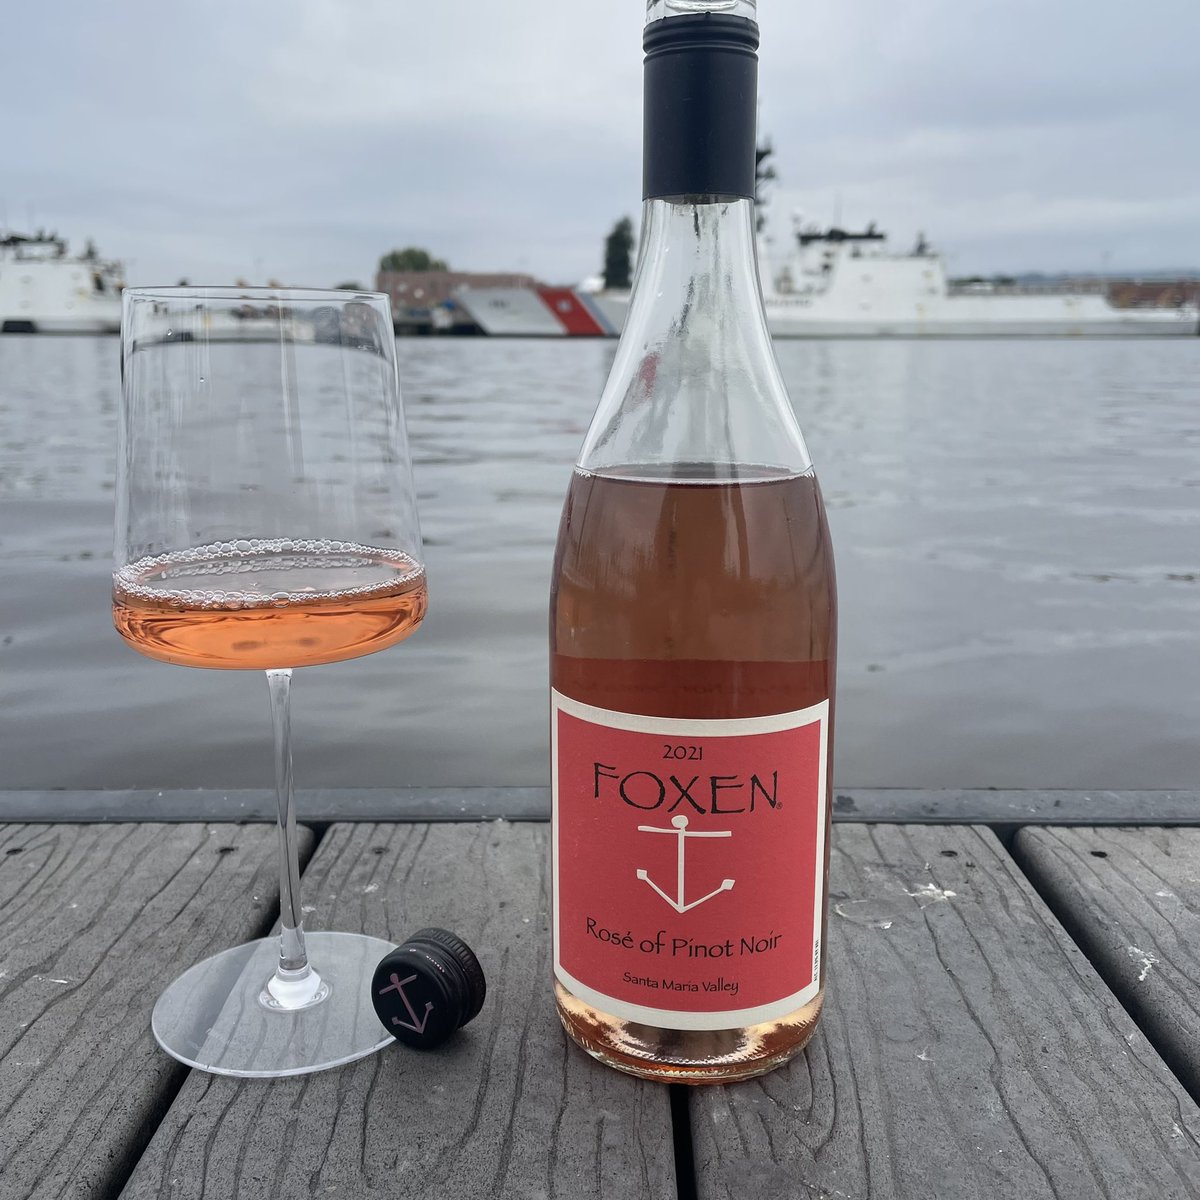 Pregaming for tonight’s #PinkSociety Party with @foxenwinery from @VisitSMV. Enjoying their rosé on the dock. This one has a nose of red cherry, orange blossom & red apple with flavors of raspberry, lemon rind & a hint of creaminess. See you in 2 hours. @jflorez @boozychef